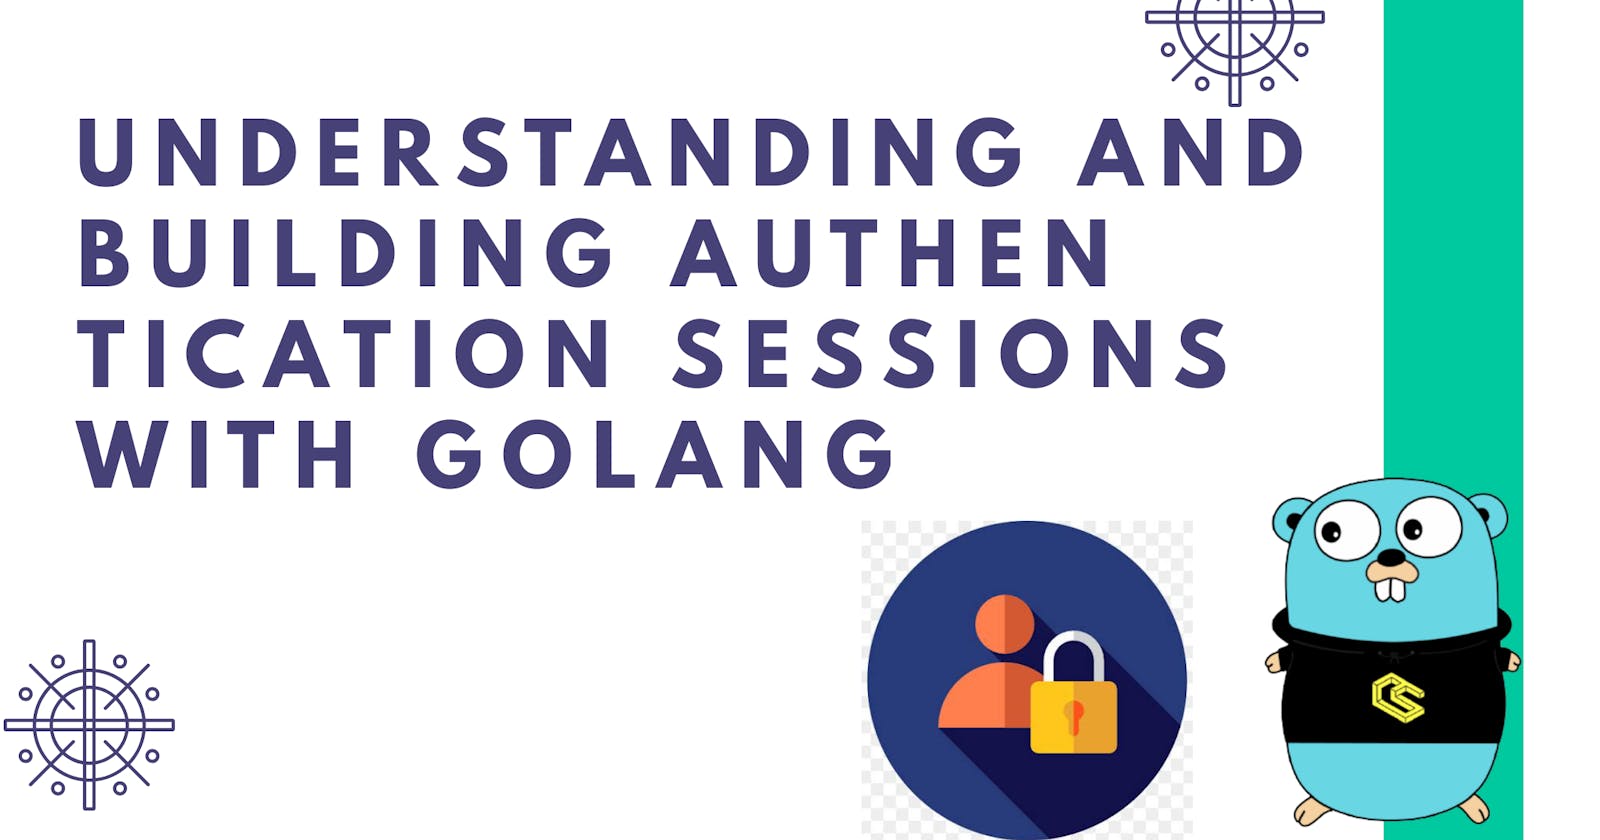 Understanding and Building Authentication Sessions in Golang